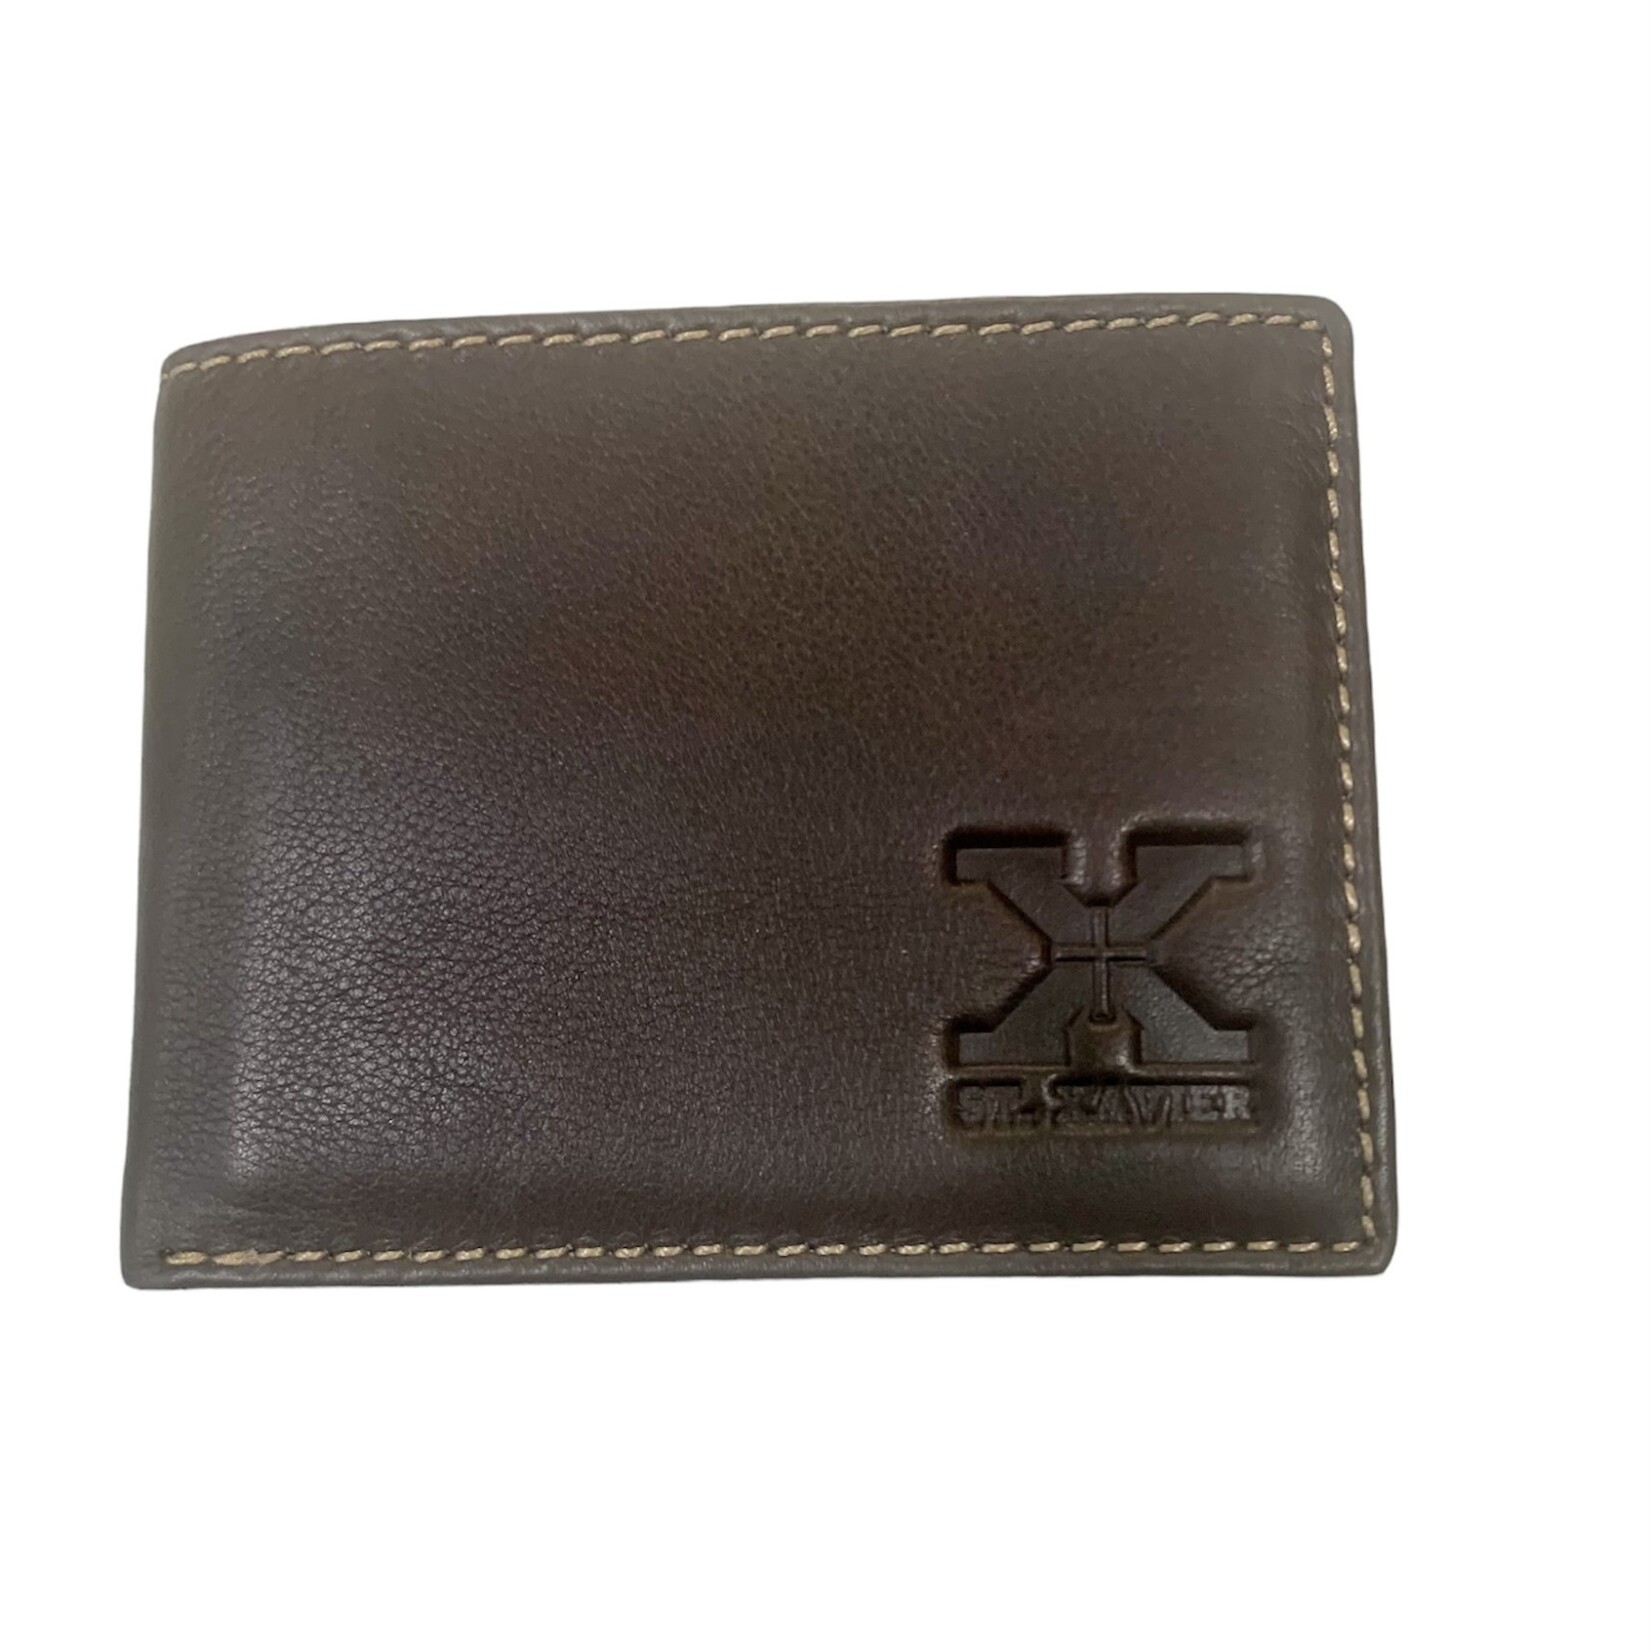 Bi-fold Brown Leather Wallet - Embossed with X